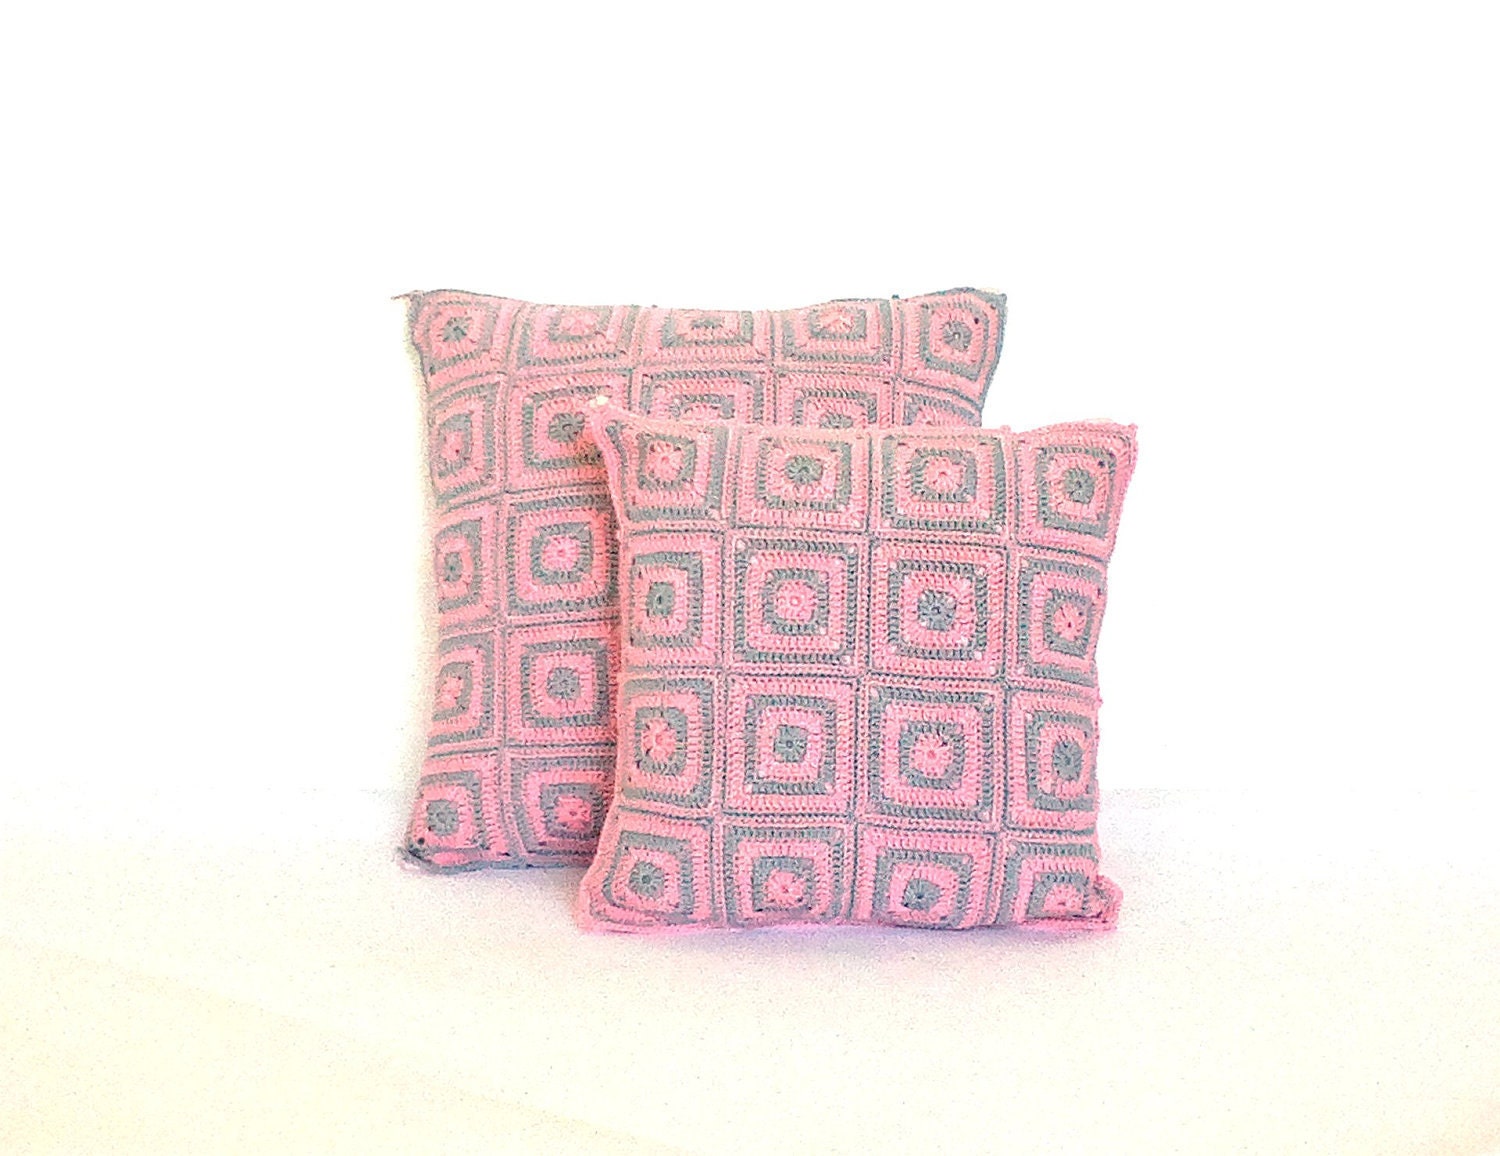 Blush rose gray crochet cushion pillow covers set, square crochet decorative pillow, 15x15 and 12x12 inches accent pillow set, granny pillow - zolayka